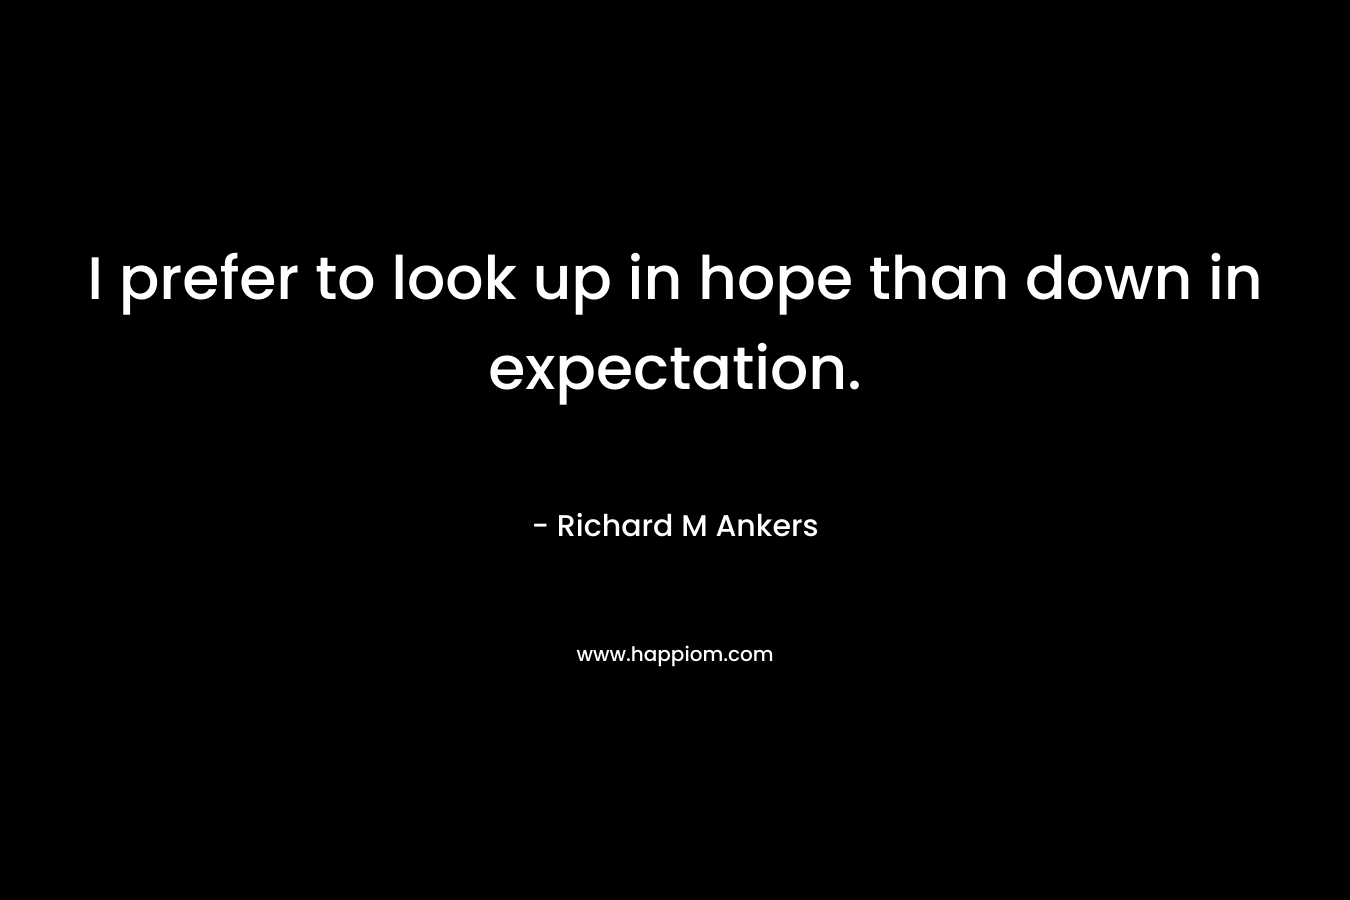 I prefer to look up in hope than down in expectation. – Richard M Ankers